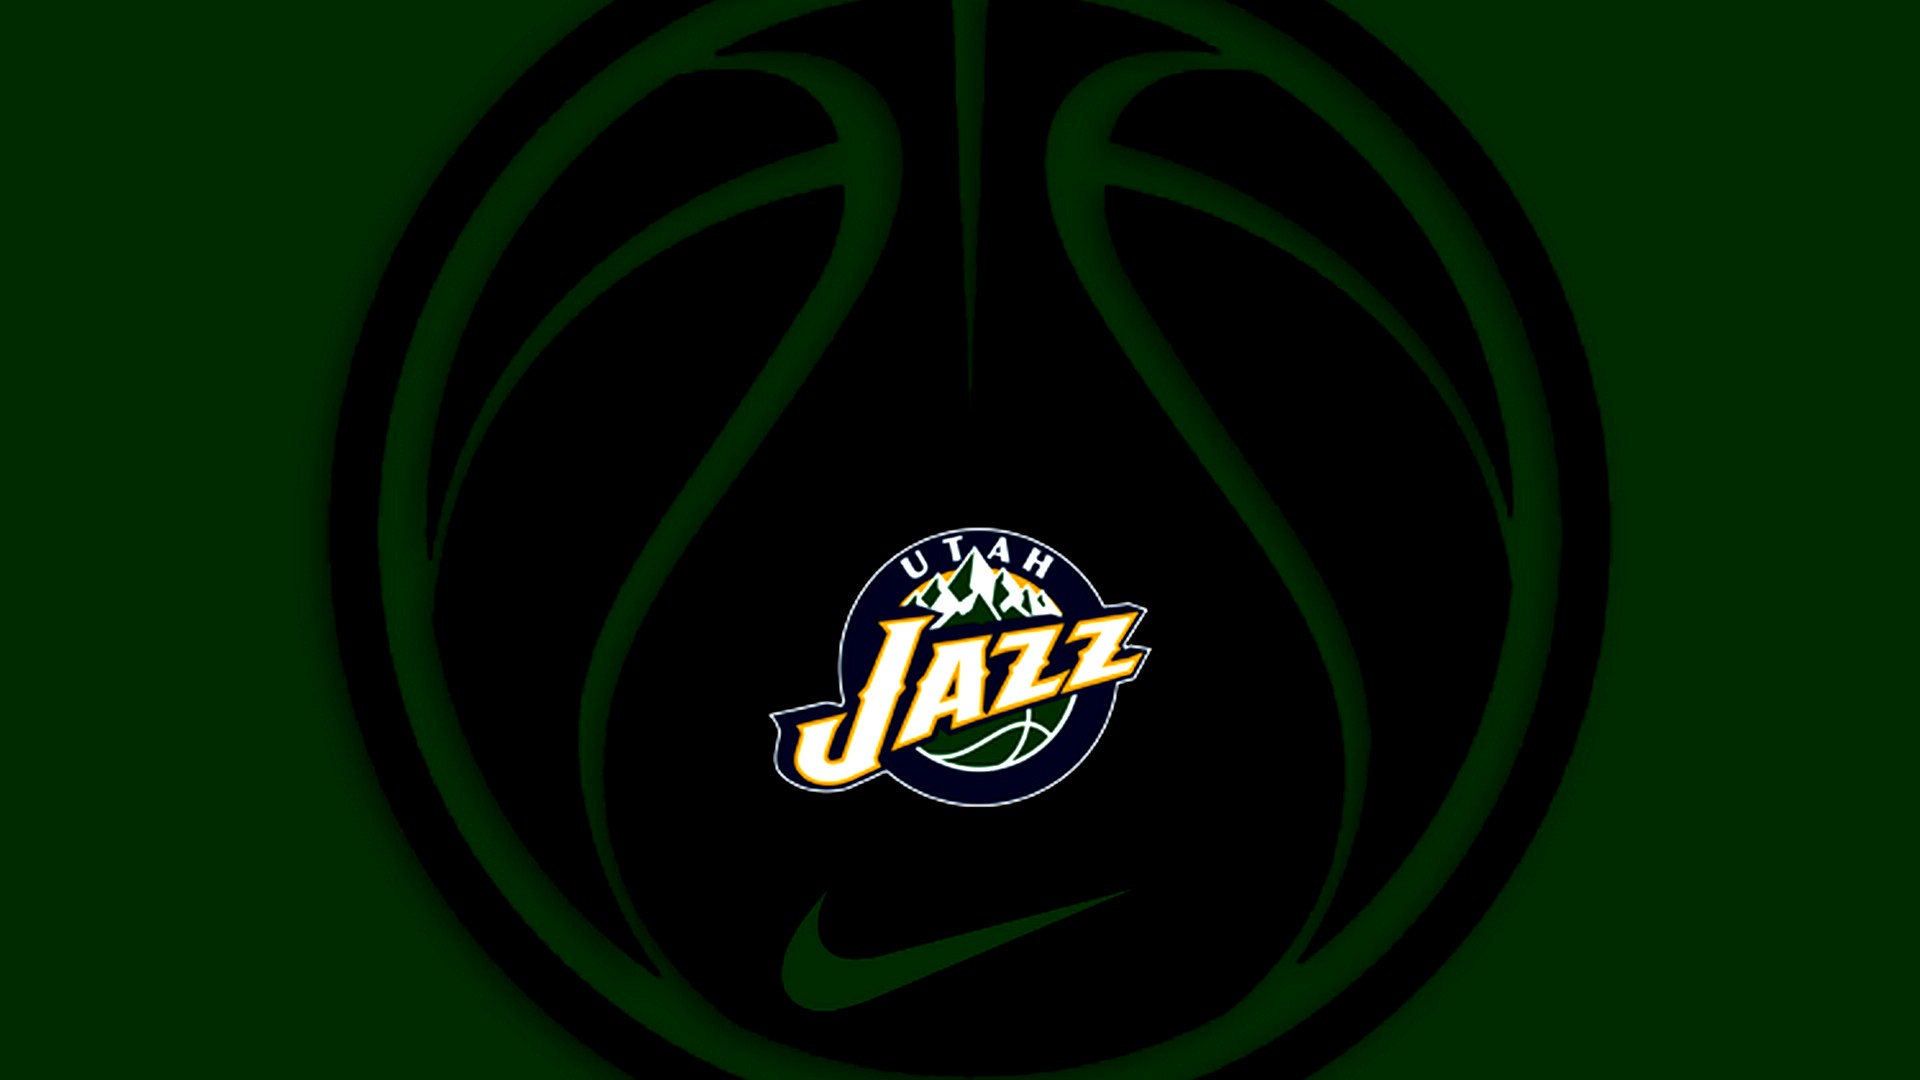 Wallpaper Desktop Utah Jazz HD with high-resolution 1920x1080 pixel. You can use this wallpaper for your Desktop Computer Backgrounds, Windows or Mac Screensavers, iPhone Lock screen, Tablet or Android and another Mobile Phone device